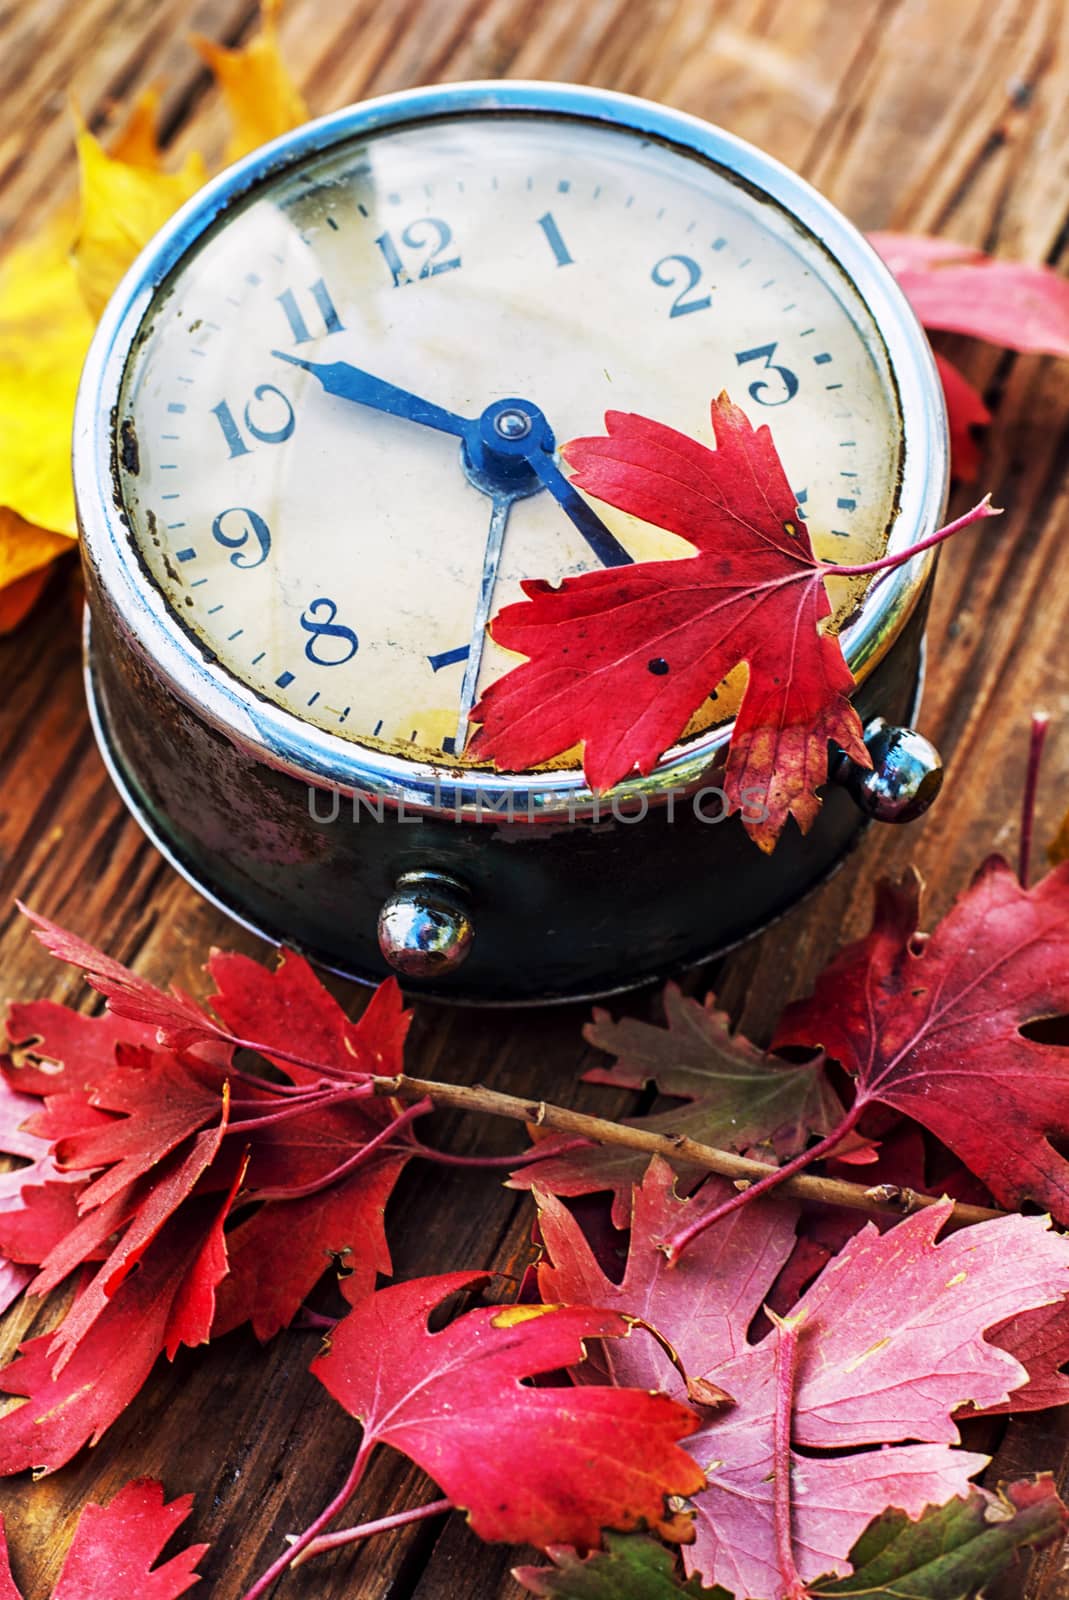 Autumn still life with an alarm clock and fallen leaves.